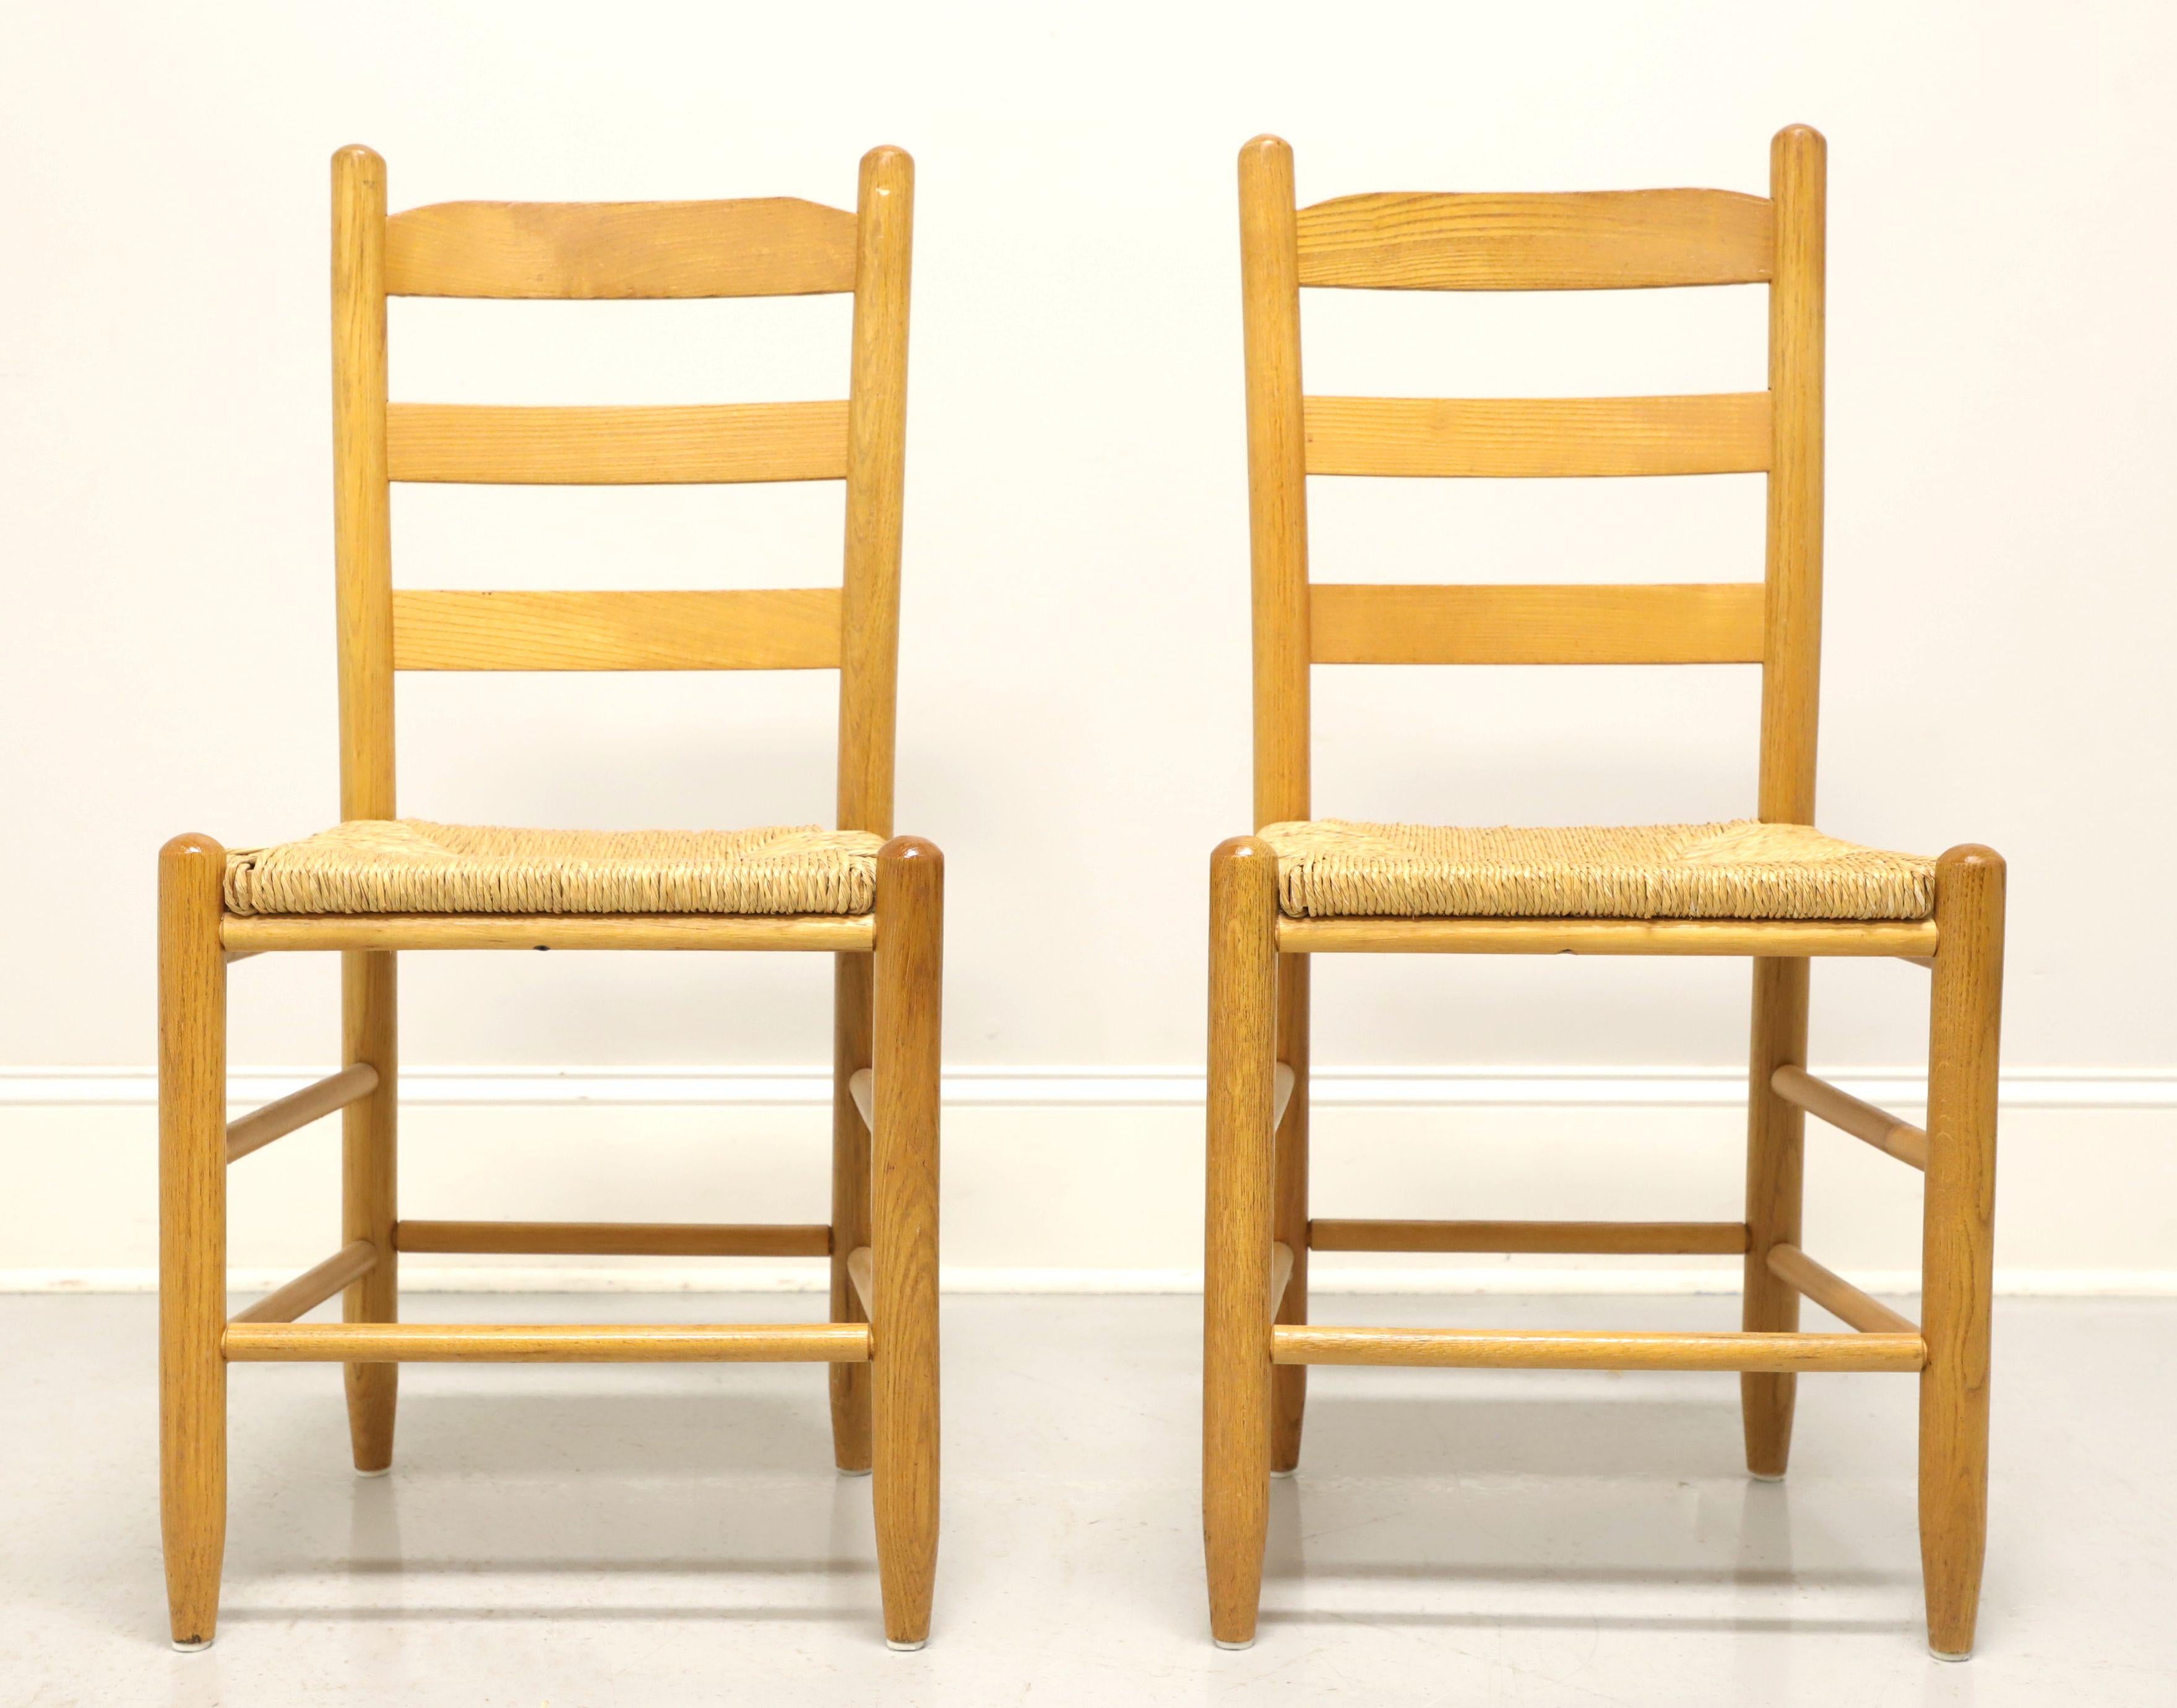 Rustic Mid 20th Century Oak Ladder Back Side Chairs with Rush Seats - Pair A